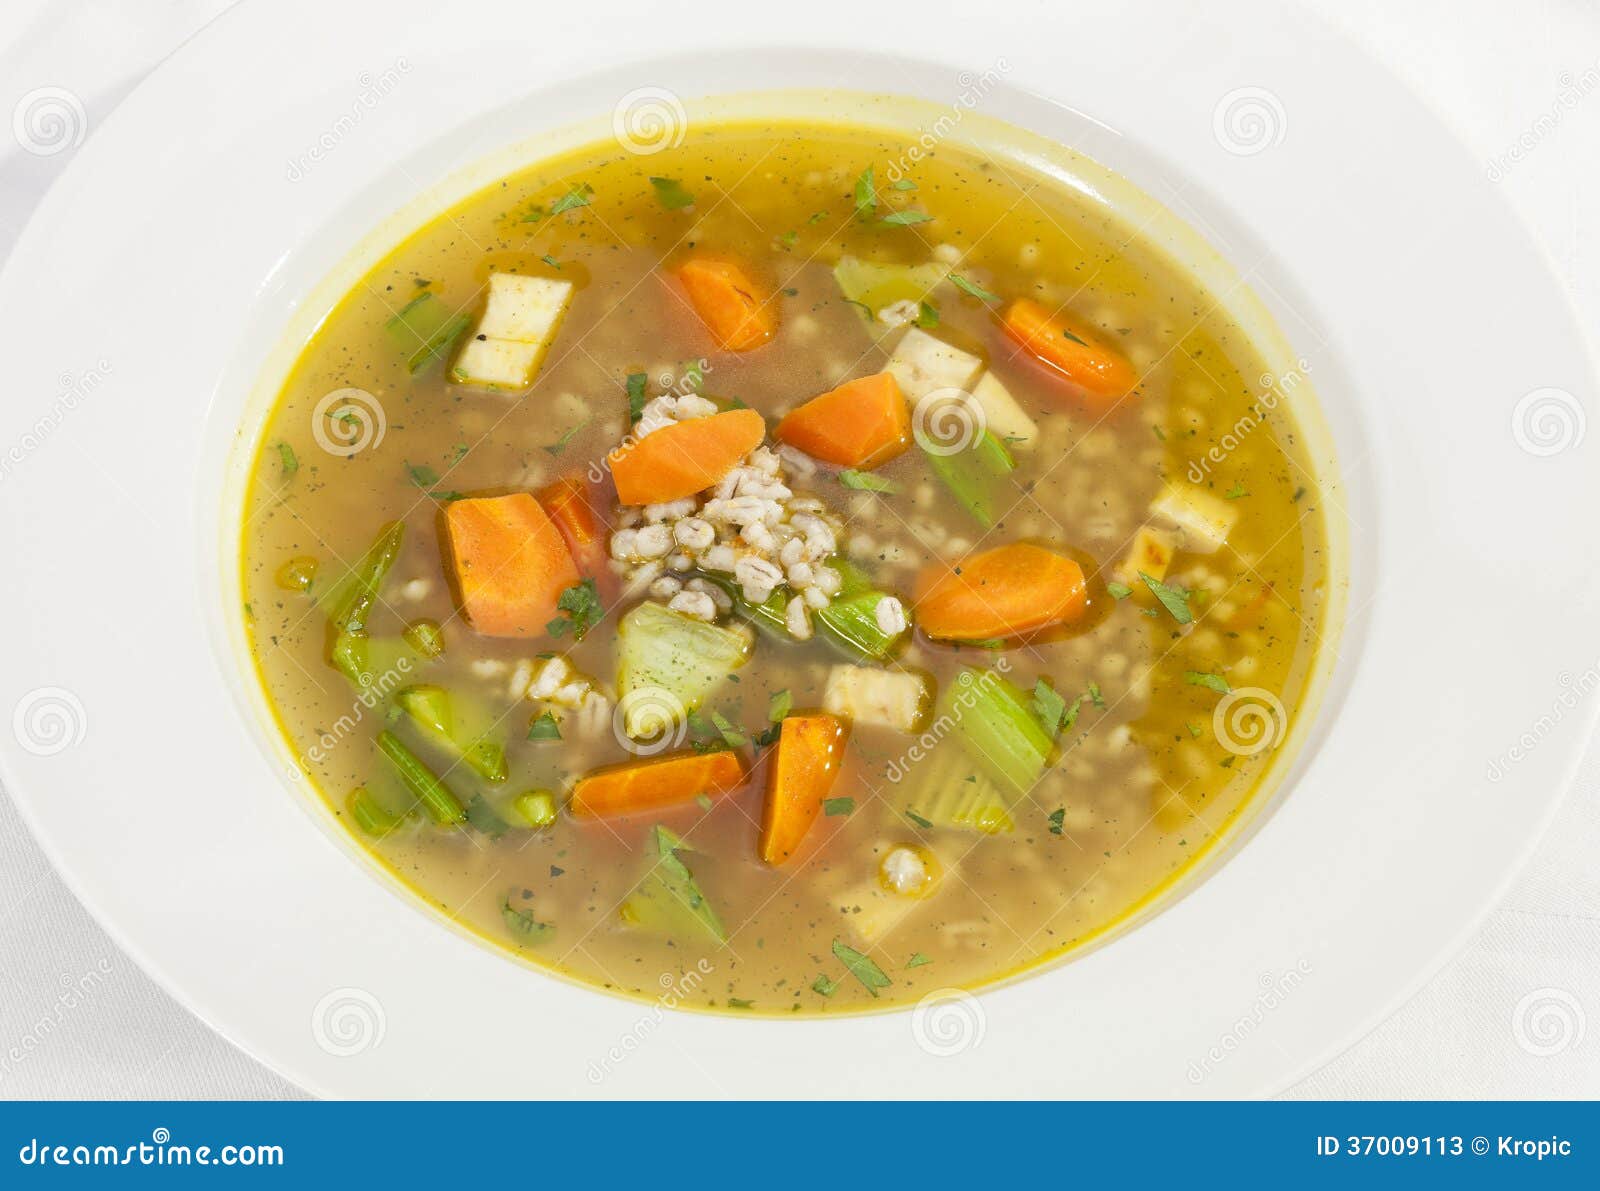 Vegetable soup stock image. Image of gourmet, bread, lunch - 37009113